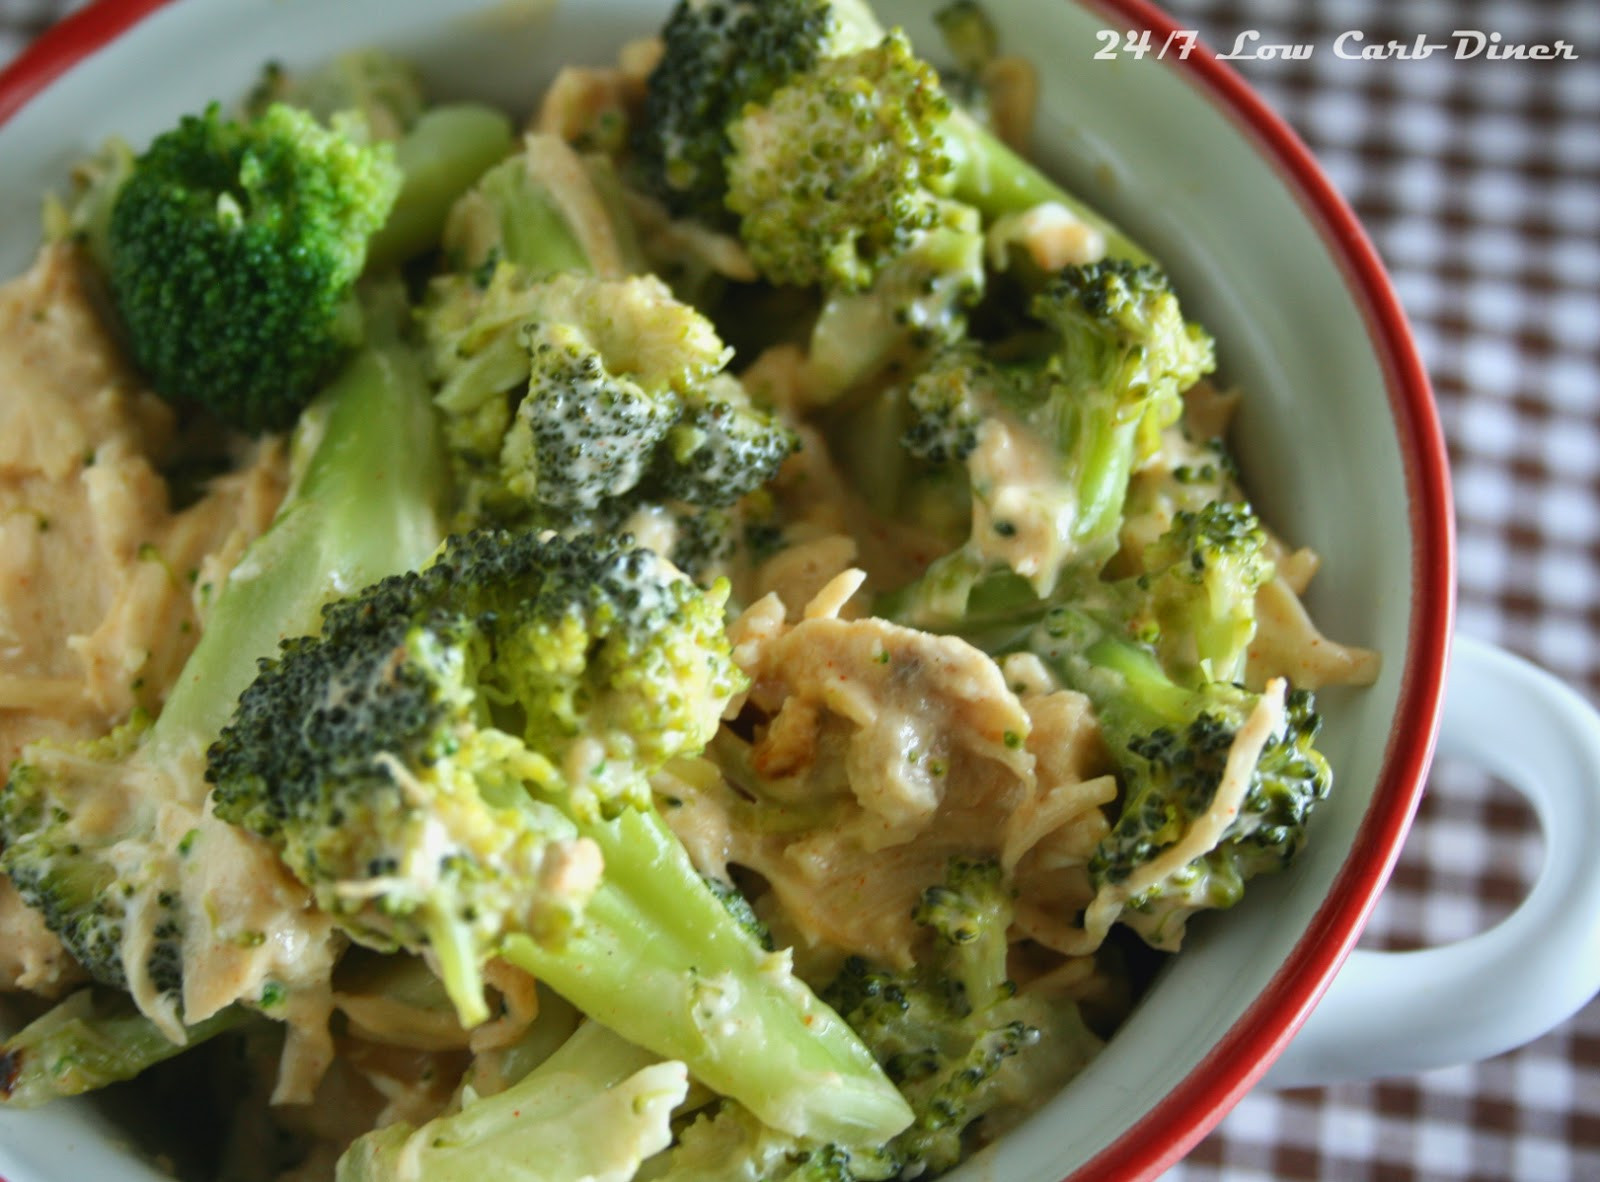 Low Carb Chicken Broccoli Casserole
 24 7 Low Carb Diner Chicken and Broccoli Casserole for 2